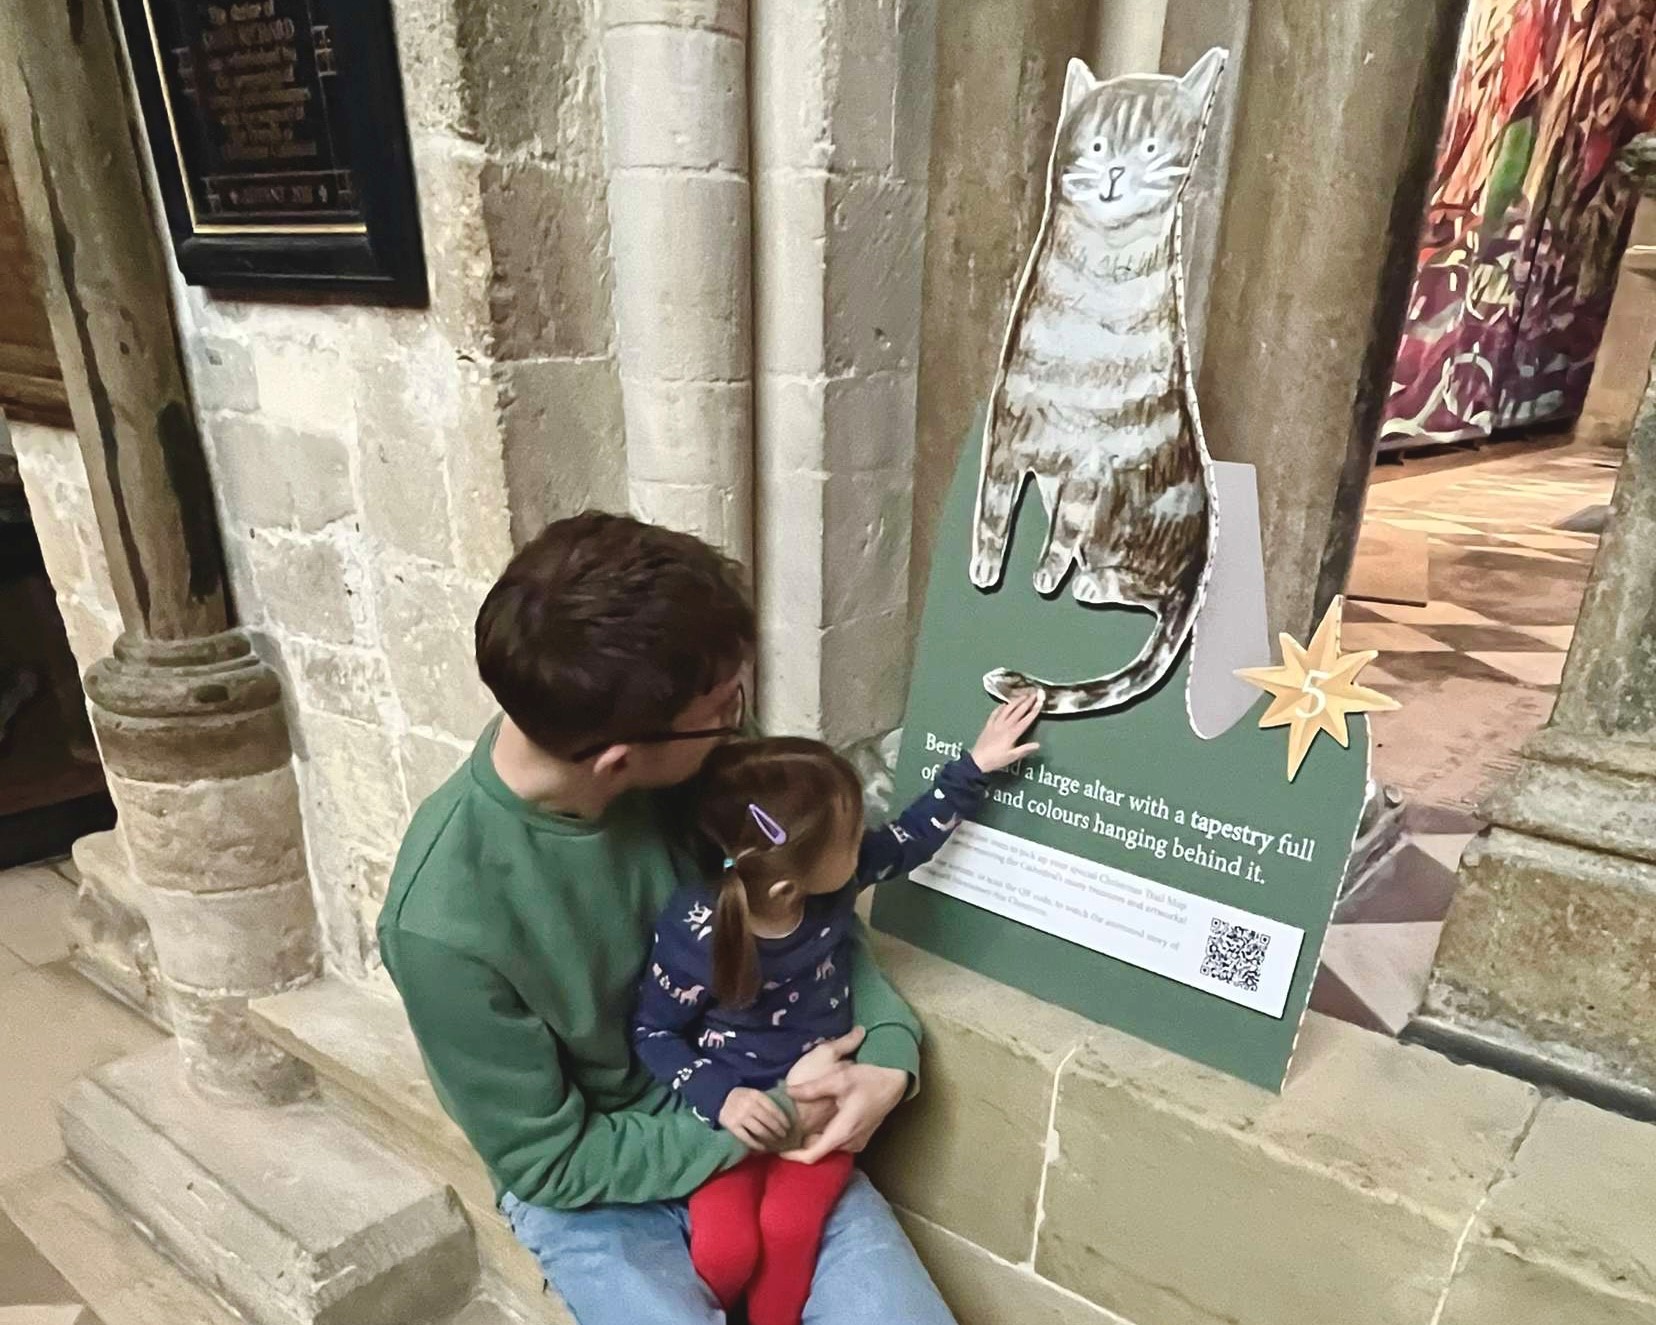 A man holding a child look at a cardboard cut out of a brown and white cat which is sat on stone steps